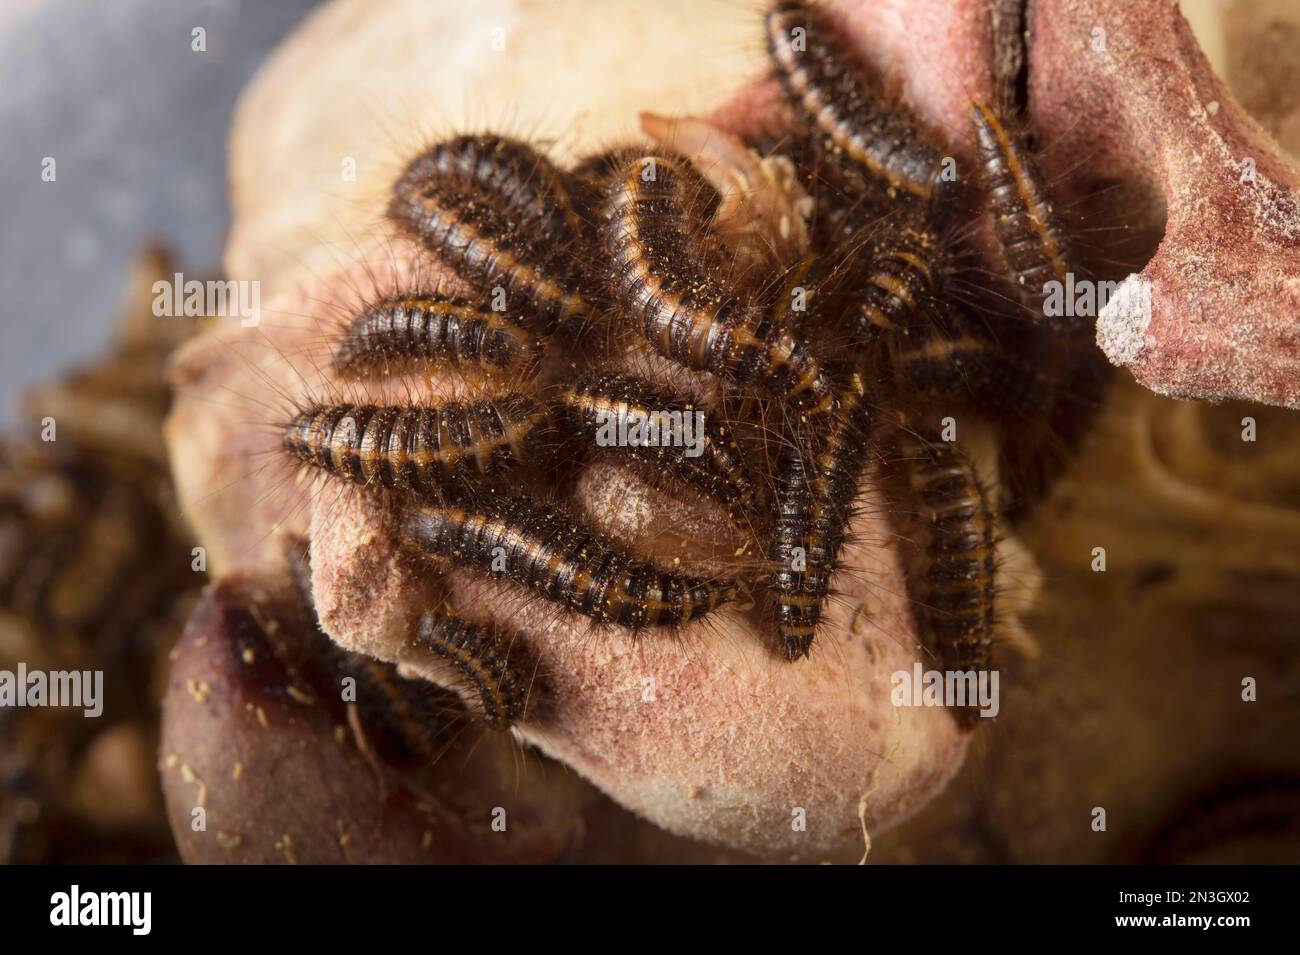 Larva of a Hide beetle (Dermestes ater) at a zoo; Dallas, Texas, United States of America Stock Photo